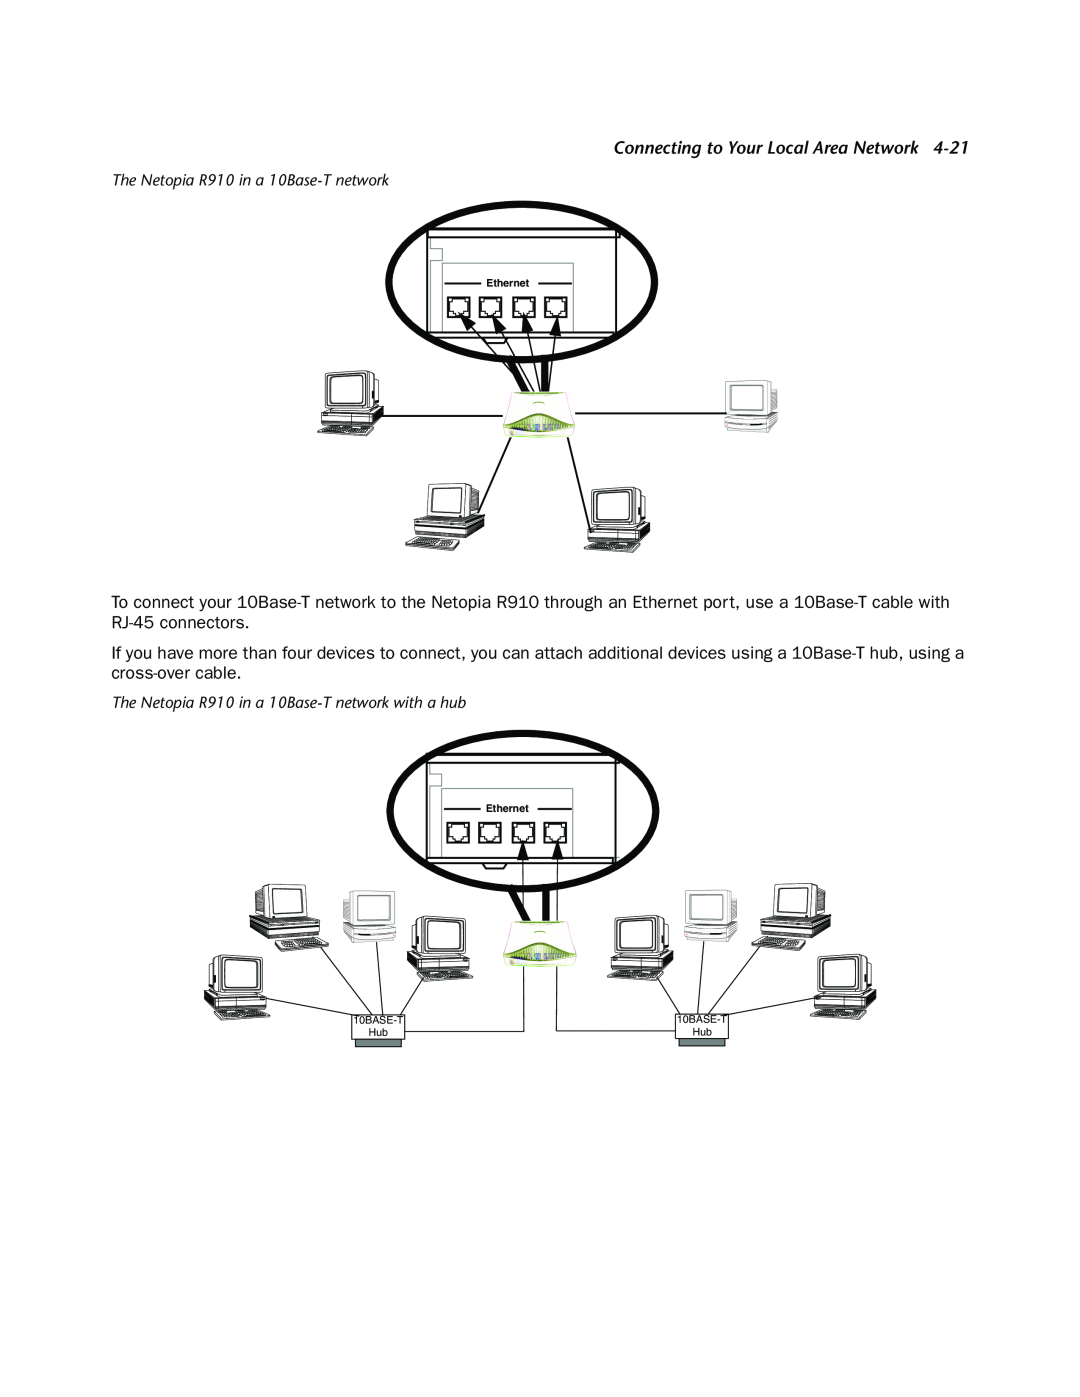 Netopia manual Connecting to Your Local Area Network, The Netopia R910 in a 10Base-T network 